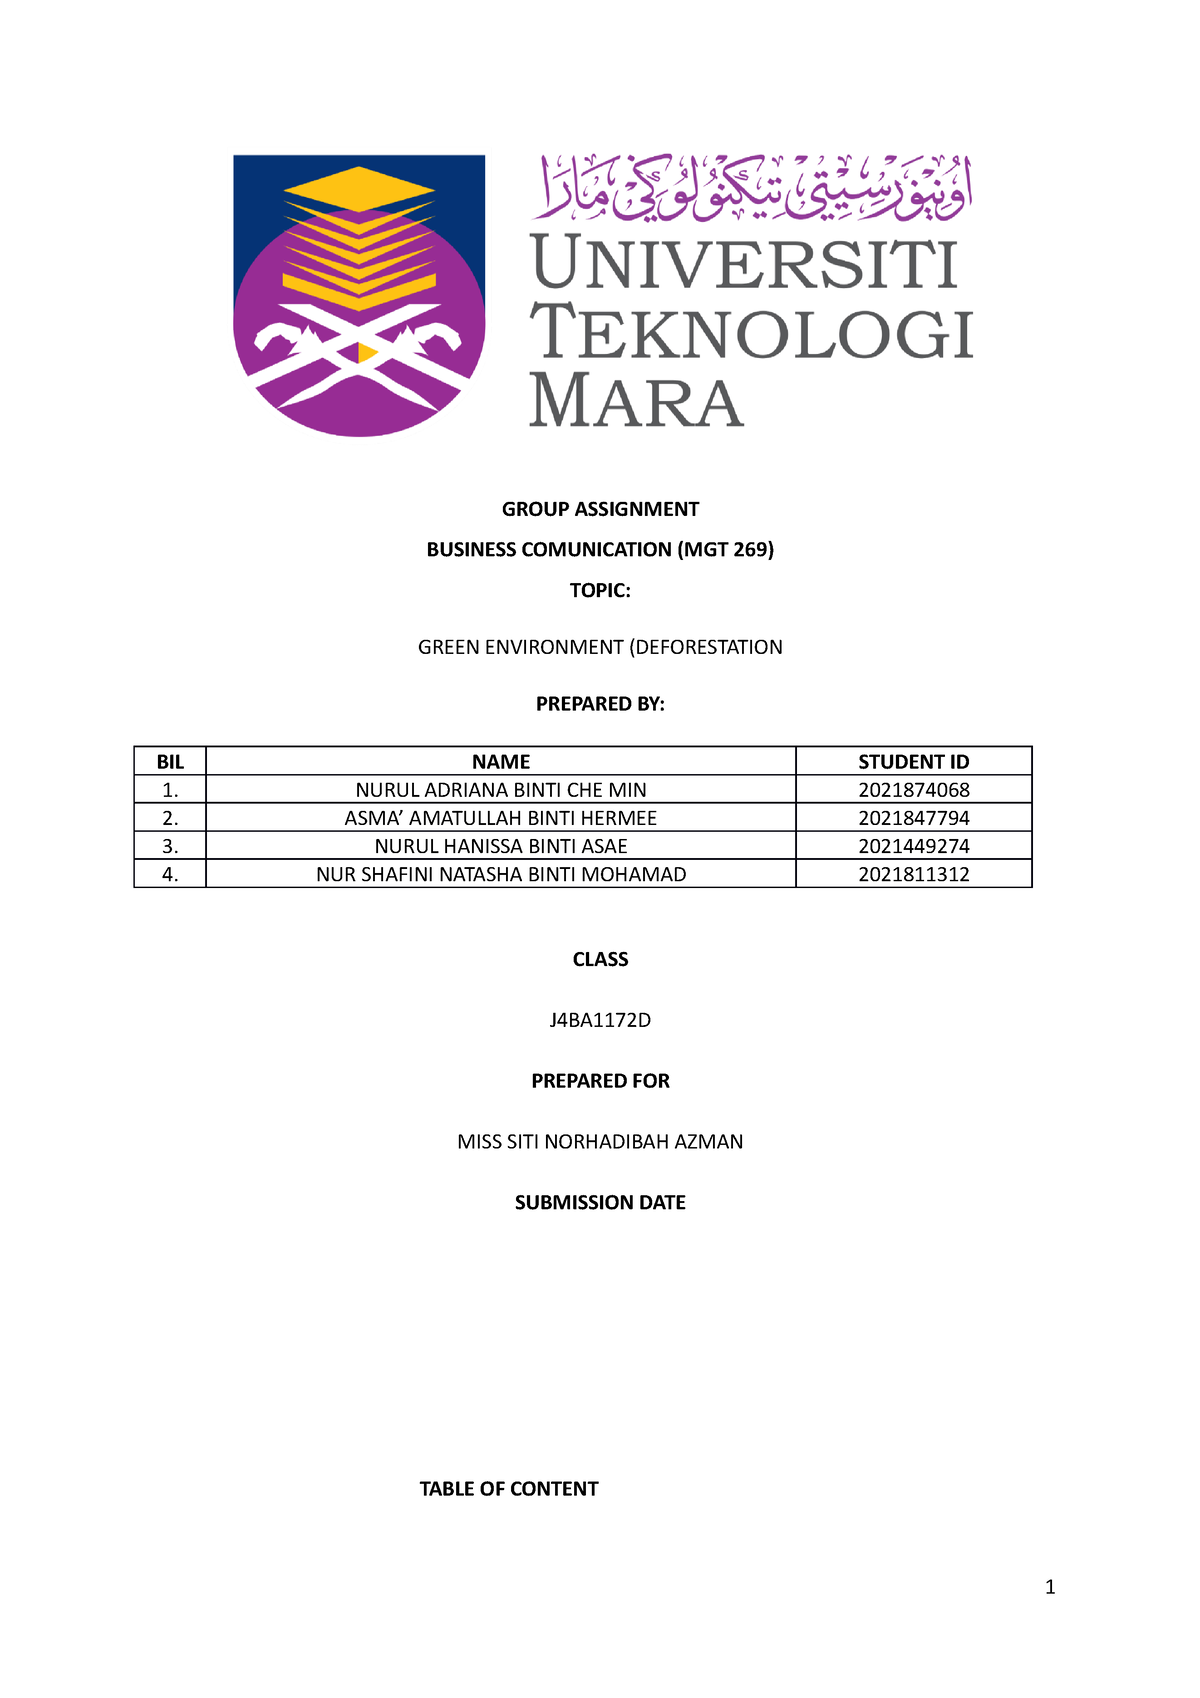 contoh report assignment mgt 269